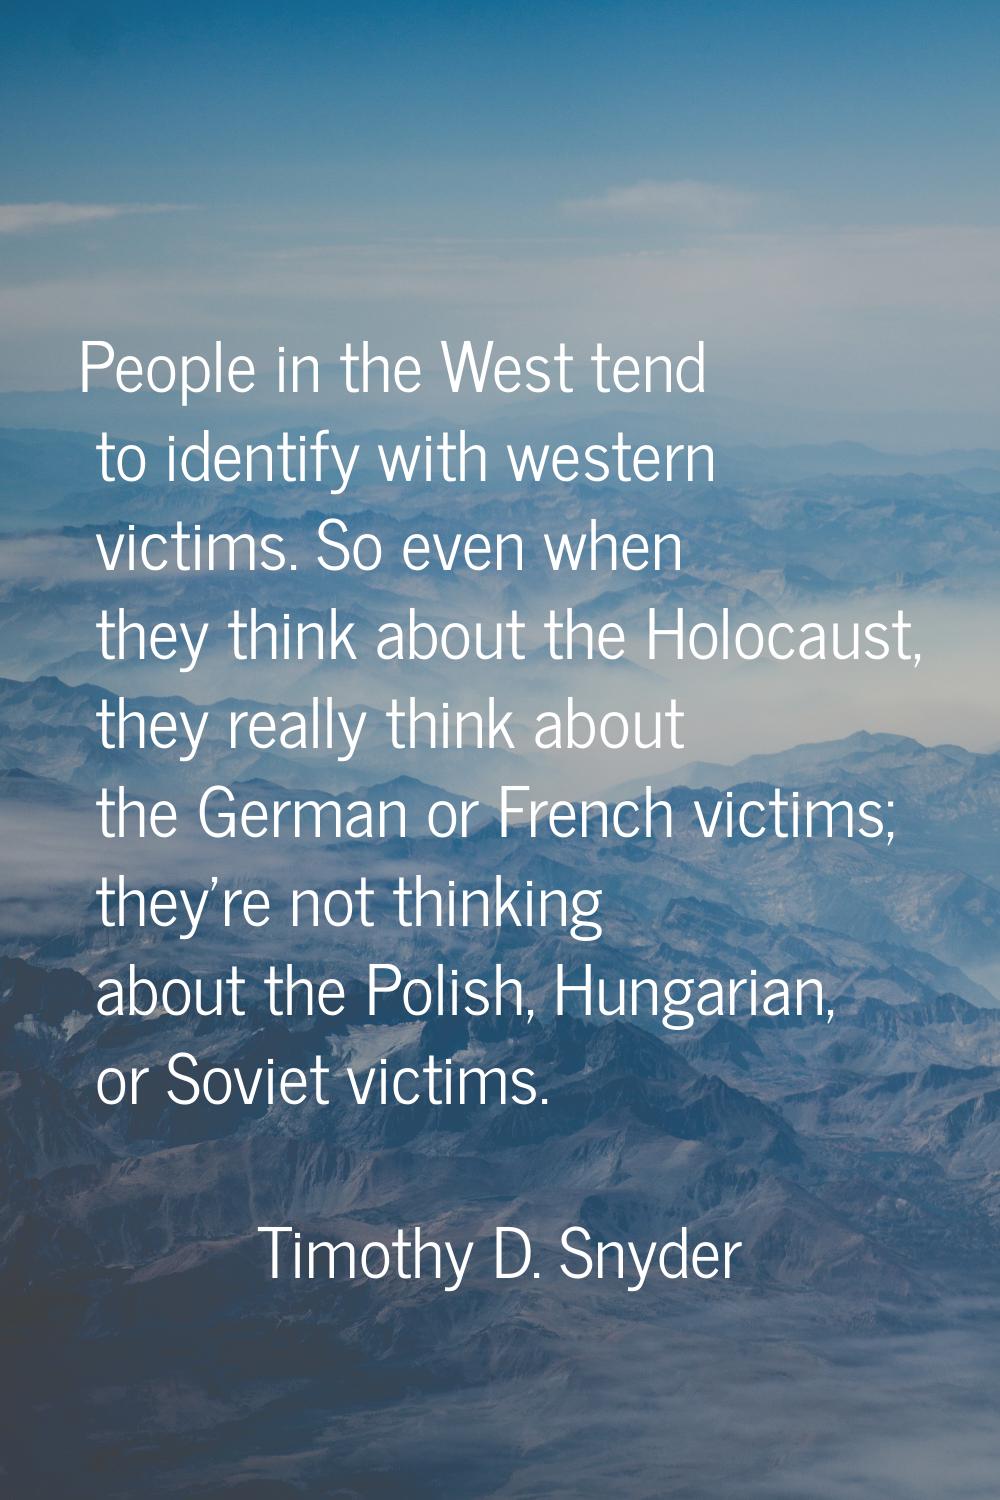 People in the West tend to identify with western victims. So even when they think about the Holocau